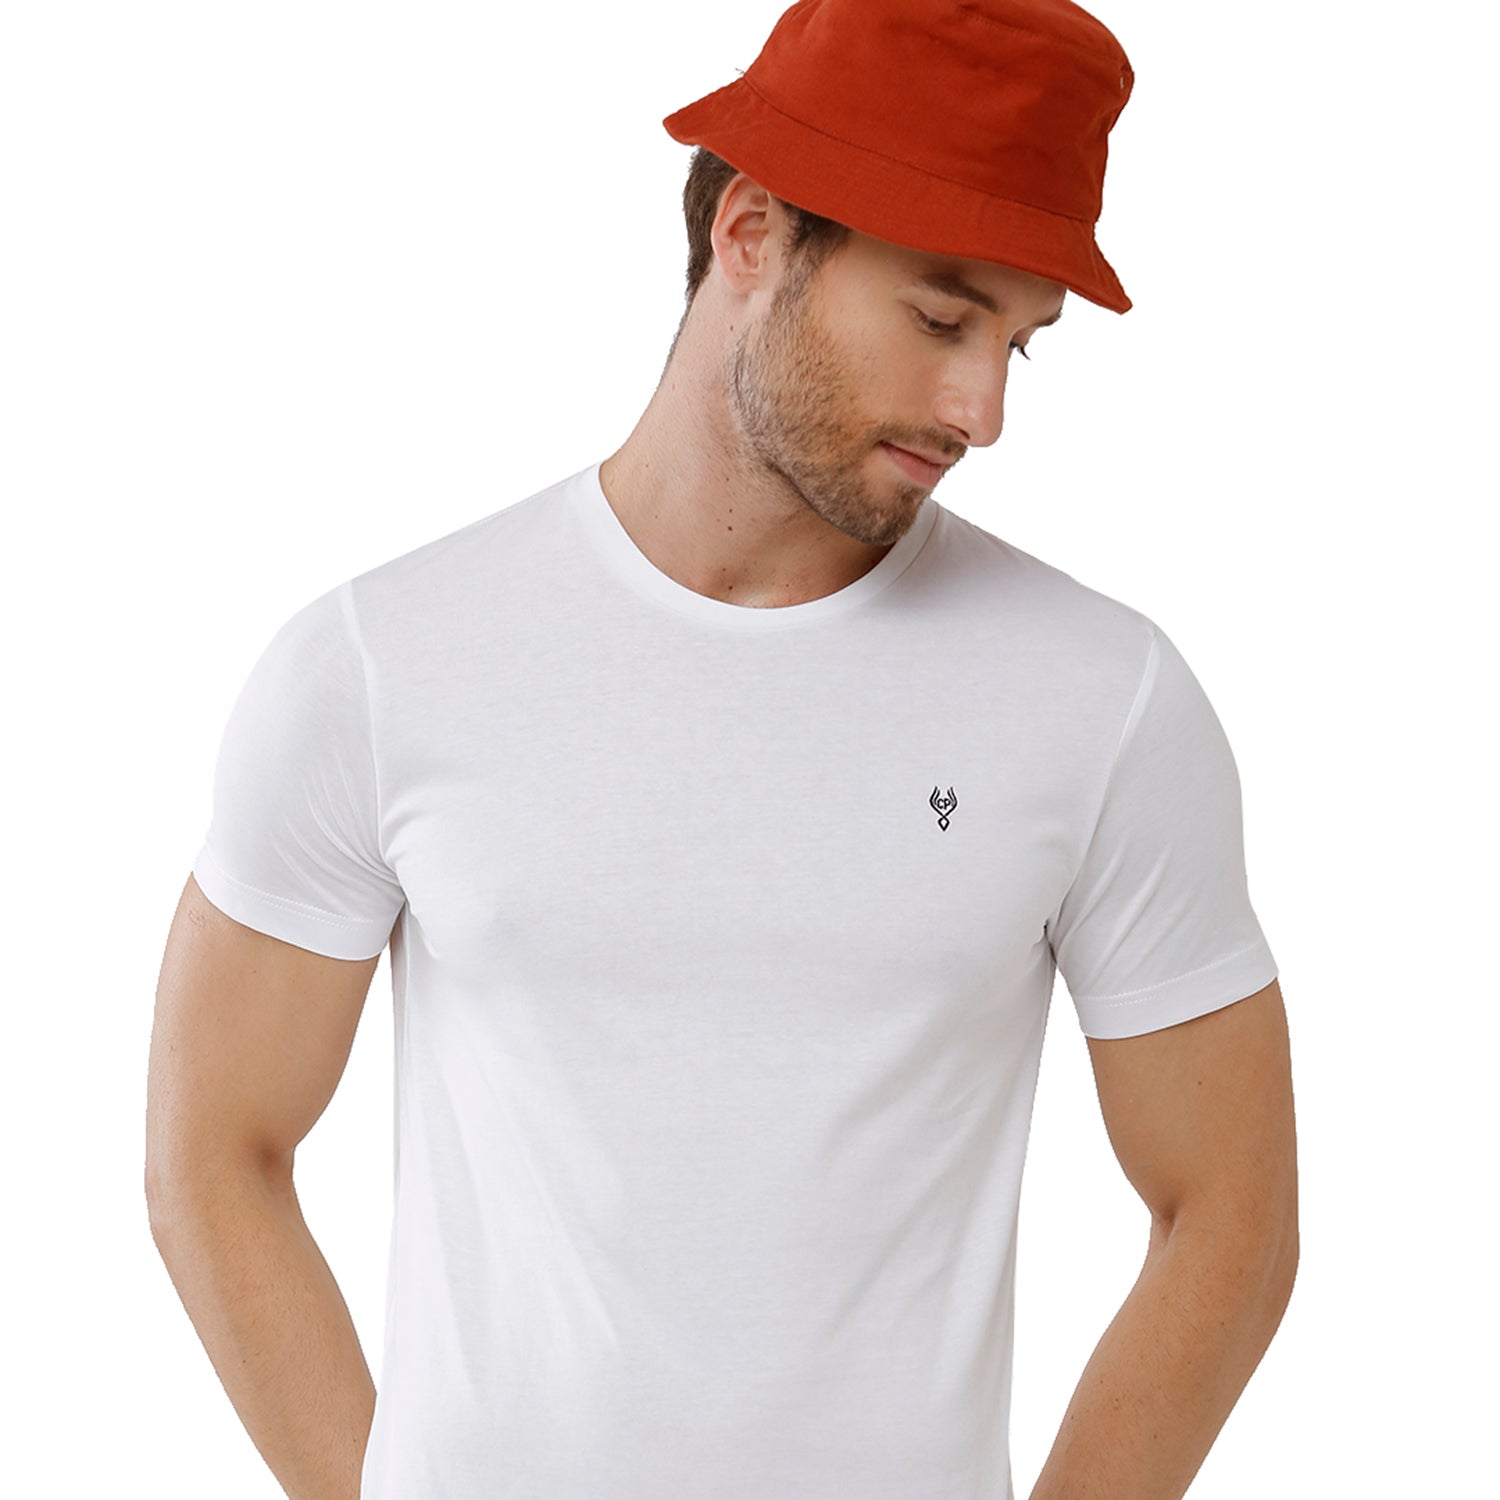 Classic Polo Men's Solid Single Jersey White Half Sleeve Slim Fit T-Shirt - Kore-01 T-shirt Classic Polo 